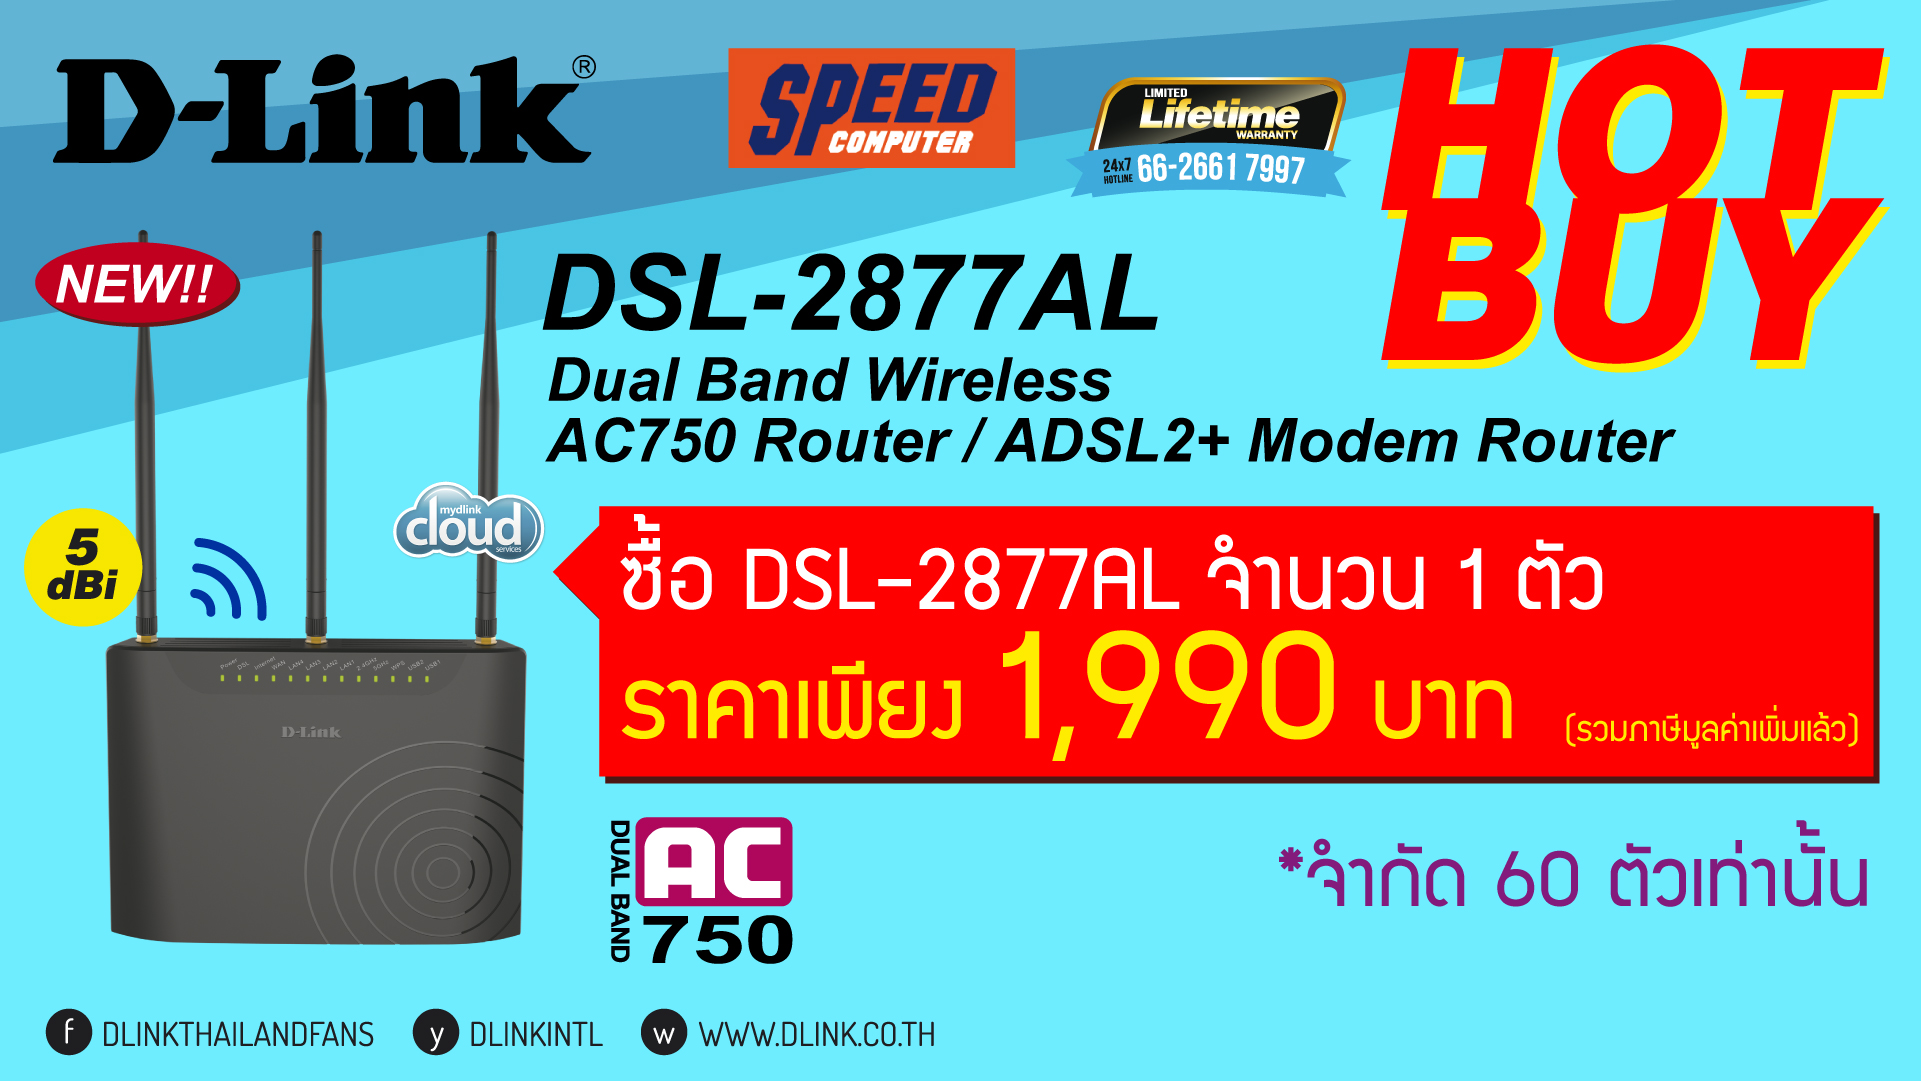 D-Link-Commart-Screen-for-Speed-March-16-01